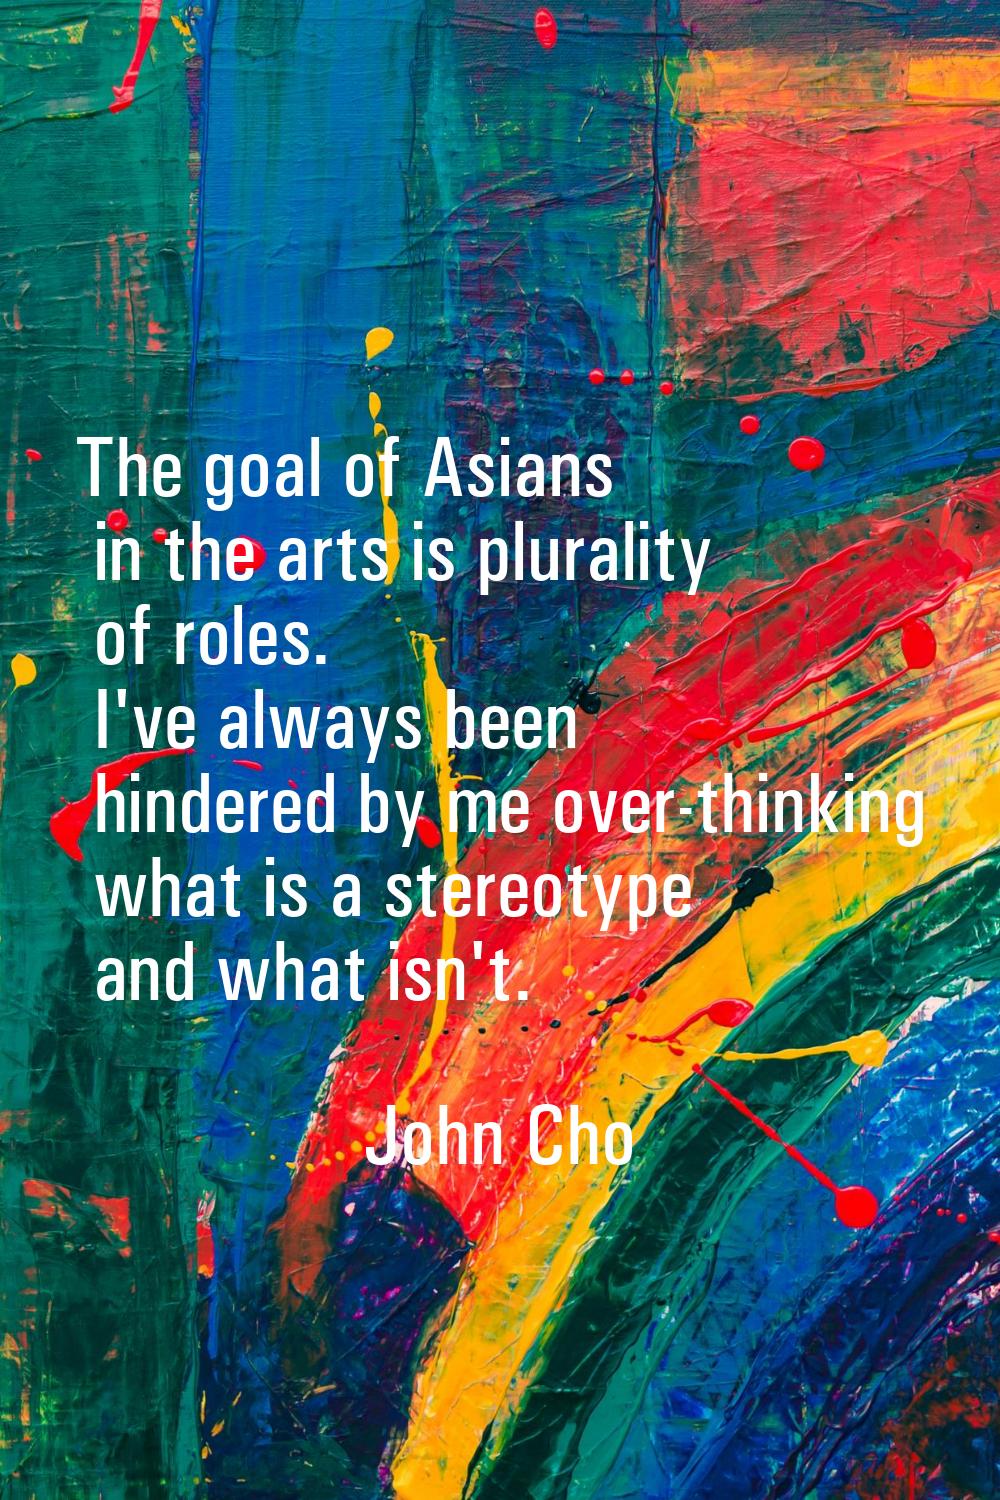 The goal of Asians in the arts is plurality of roles. I've always been hindered by me over-thinking